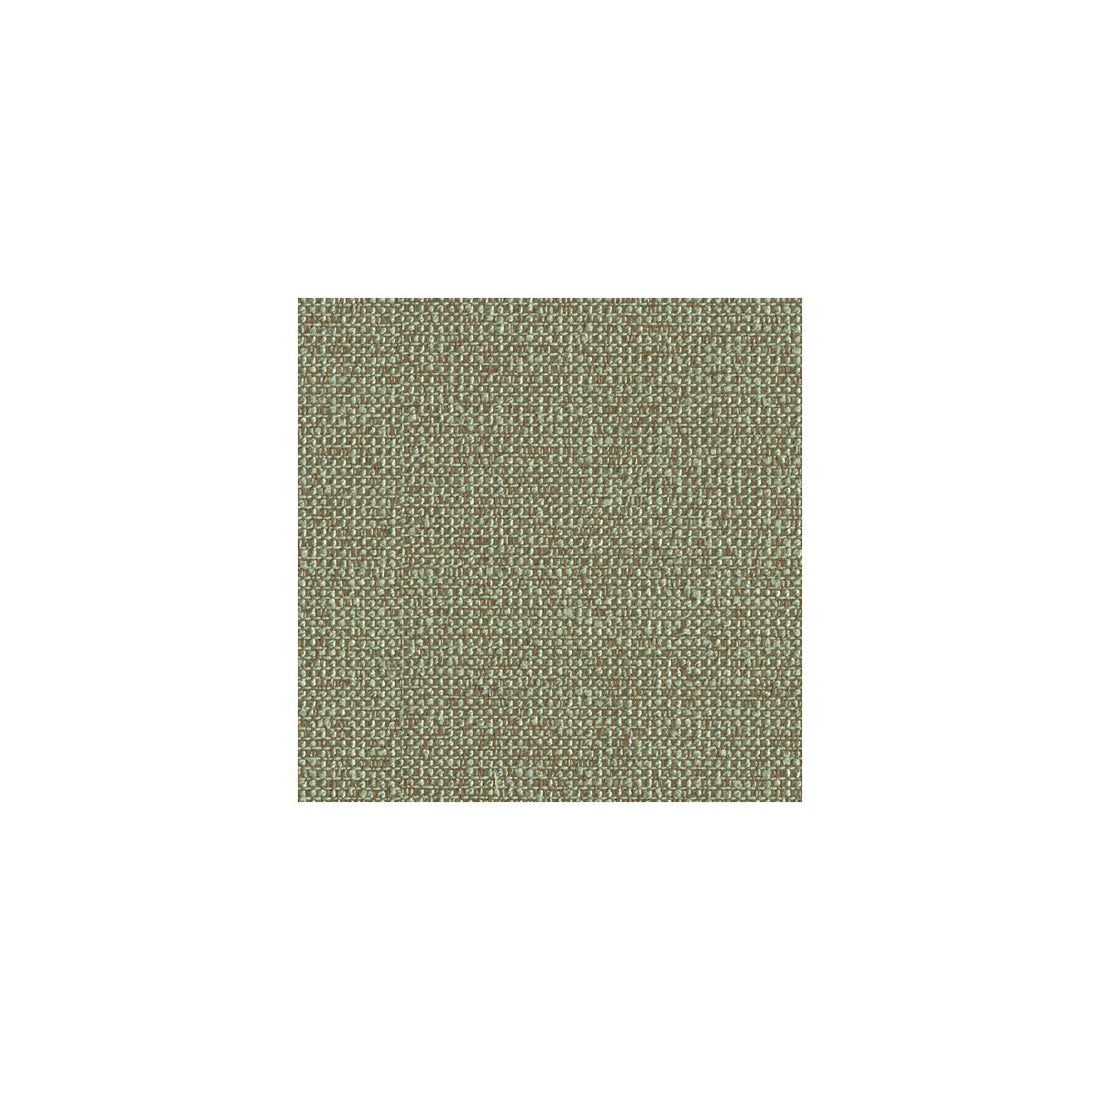 Accolade fabric in opal color - pattern 31516.135.0 - by Kravet Contract in the Contract Gis collection